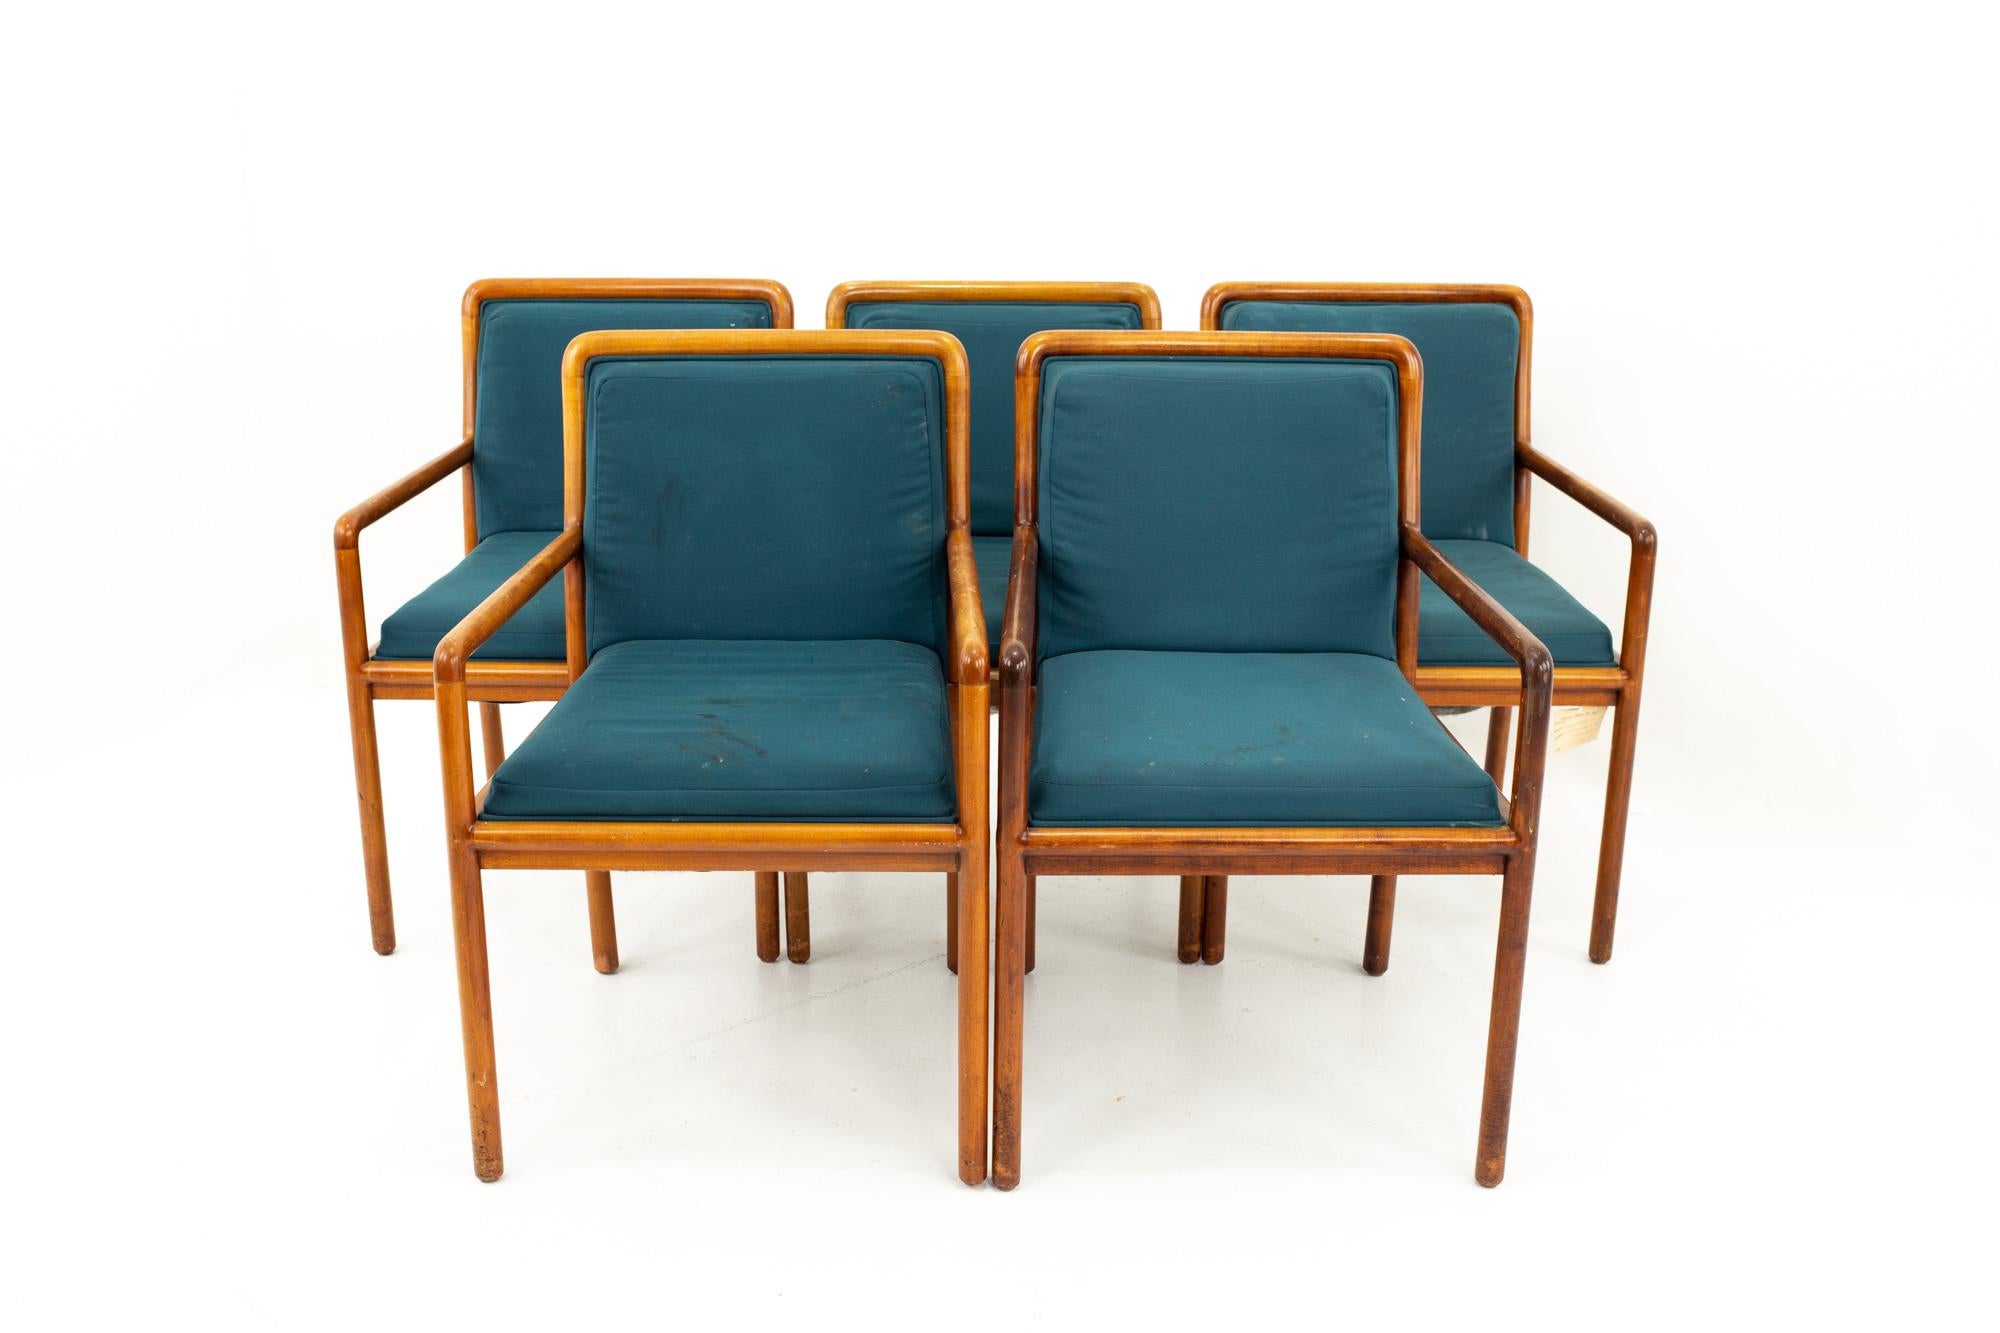 Ward Bennett for Brickel Associates Mid Century armchairs, set of 5
Each chair measures: 22.5 wide x 24.5 deep x 33.5 high, with a seat height of 18.5 inches 

All pieces of furniture can be had in what we call restored vintage condition. This means